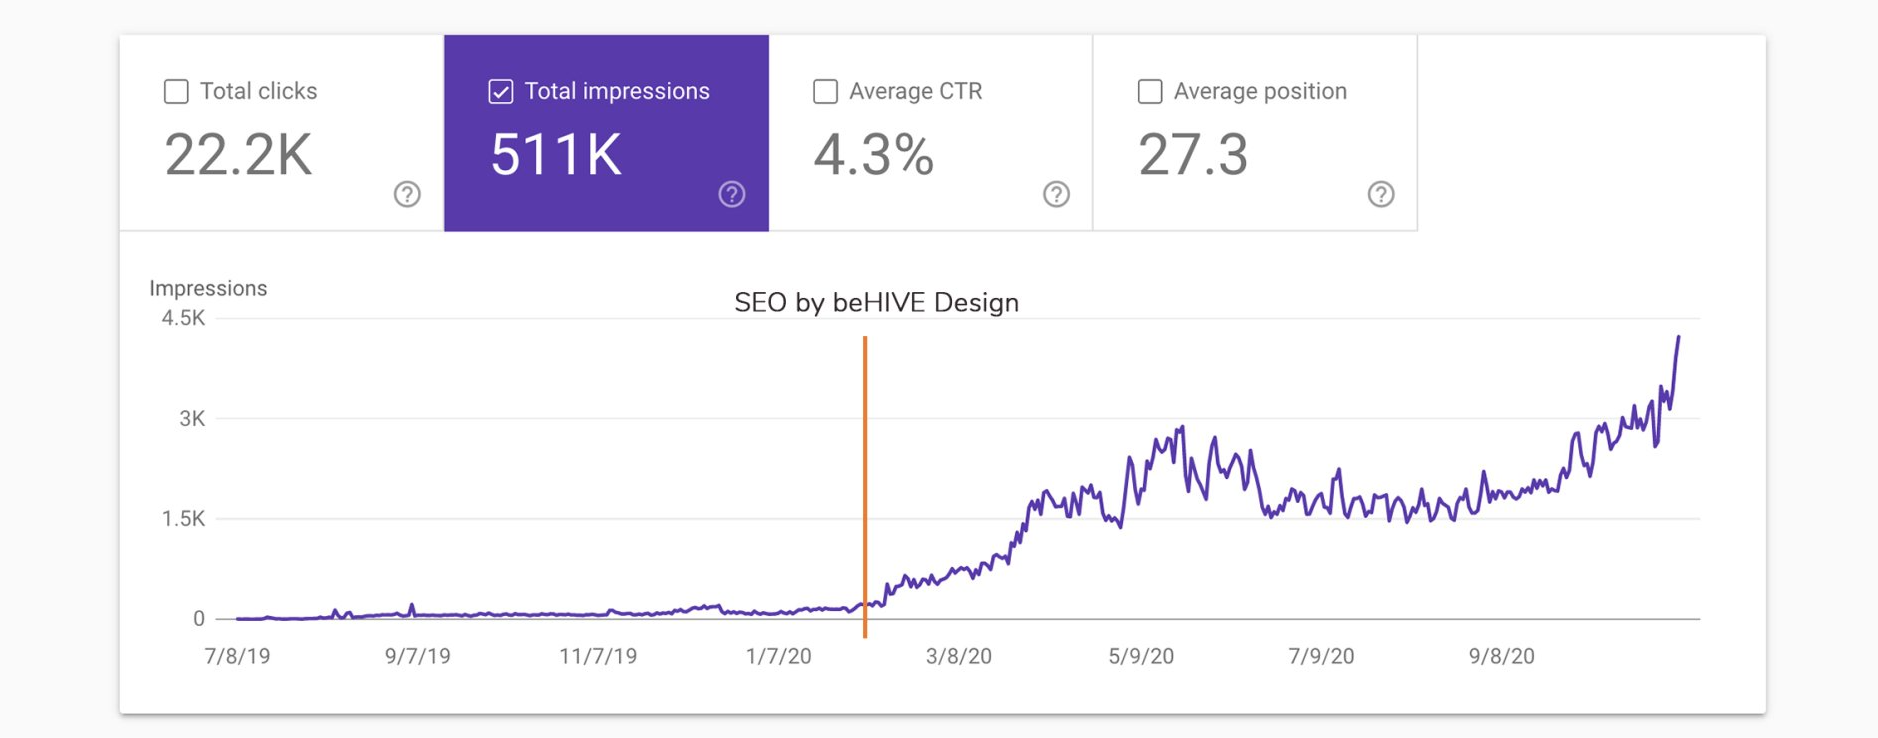 SEO performance by behive design